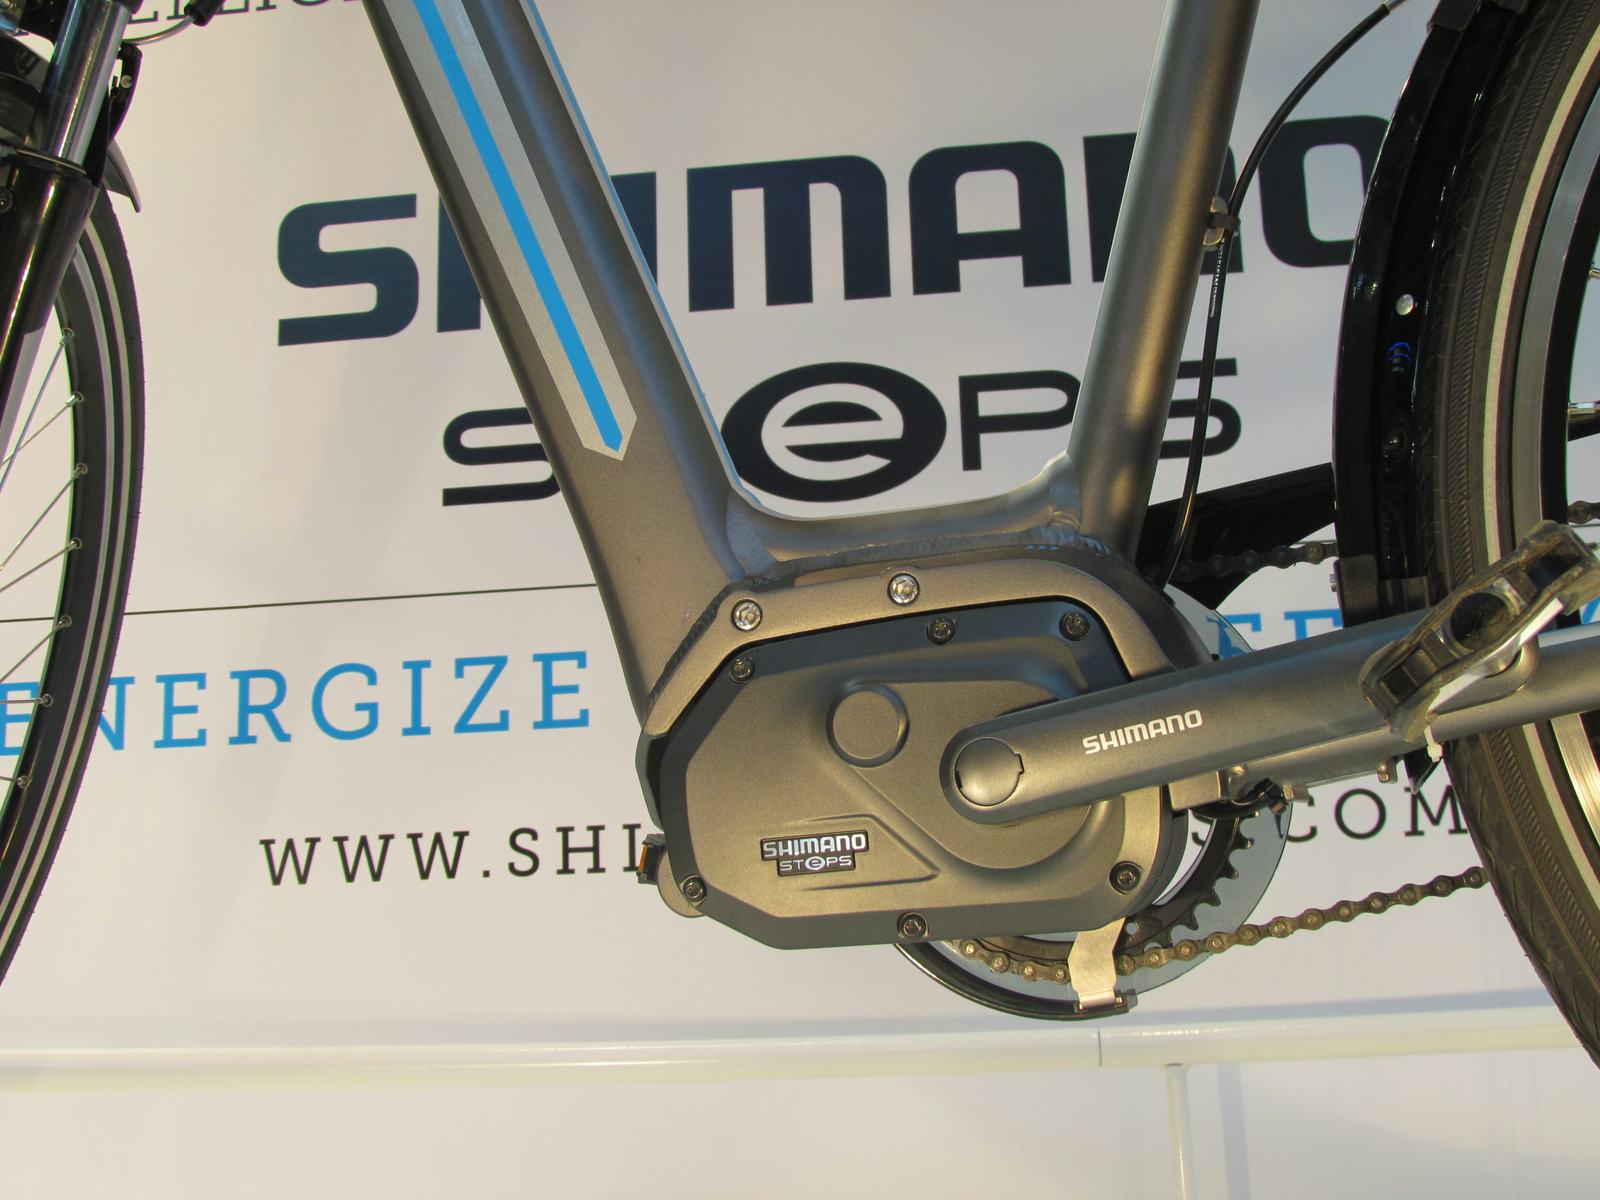 Shimano is focusing further on e-bikes with new software updates as well as with the new rollerbrake SD-C6000 which is especially suited for the use in heavier bicycles like e-bikes. – Photo Bike Europe